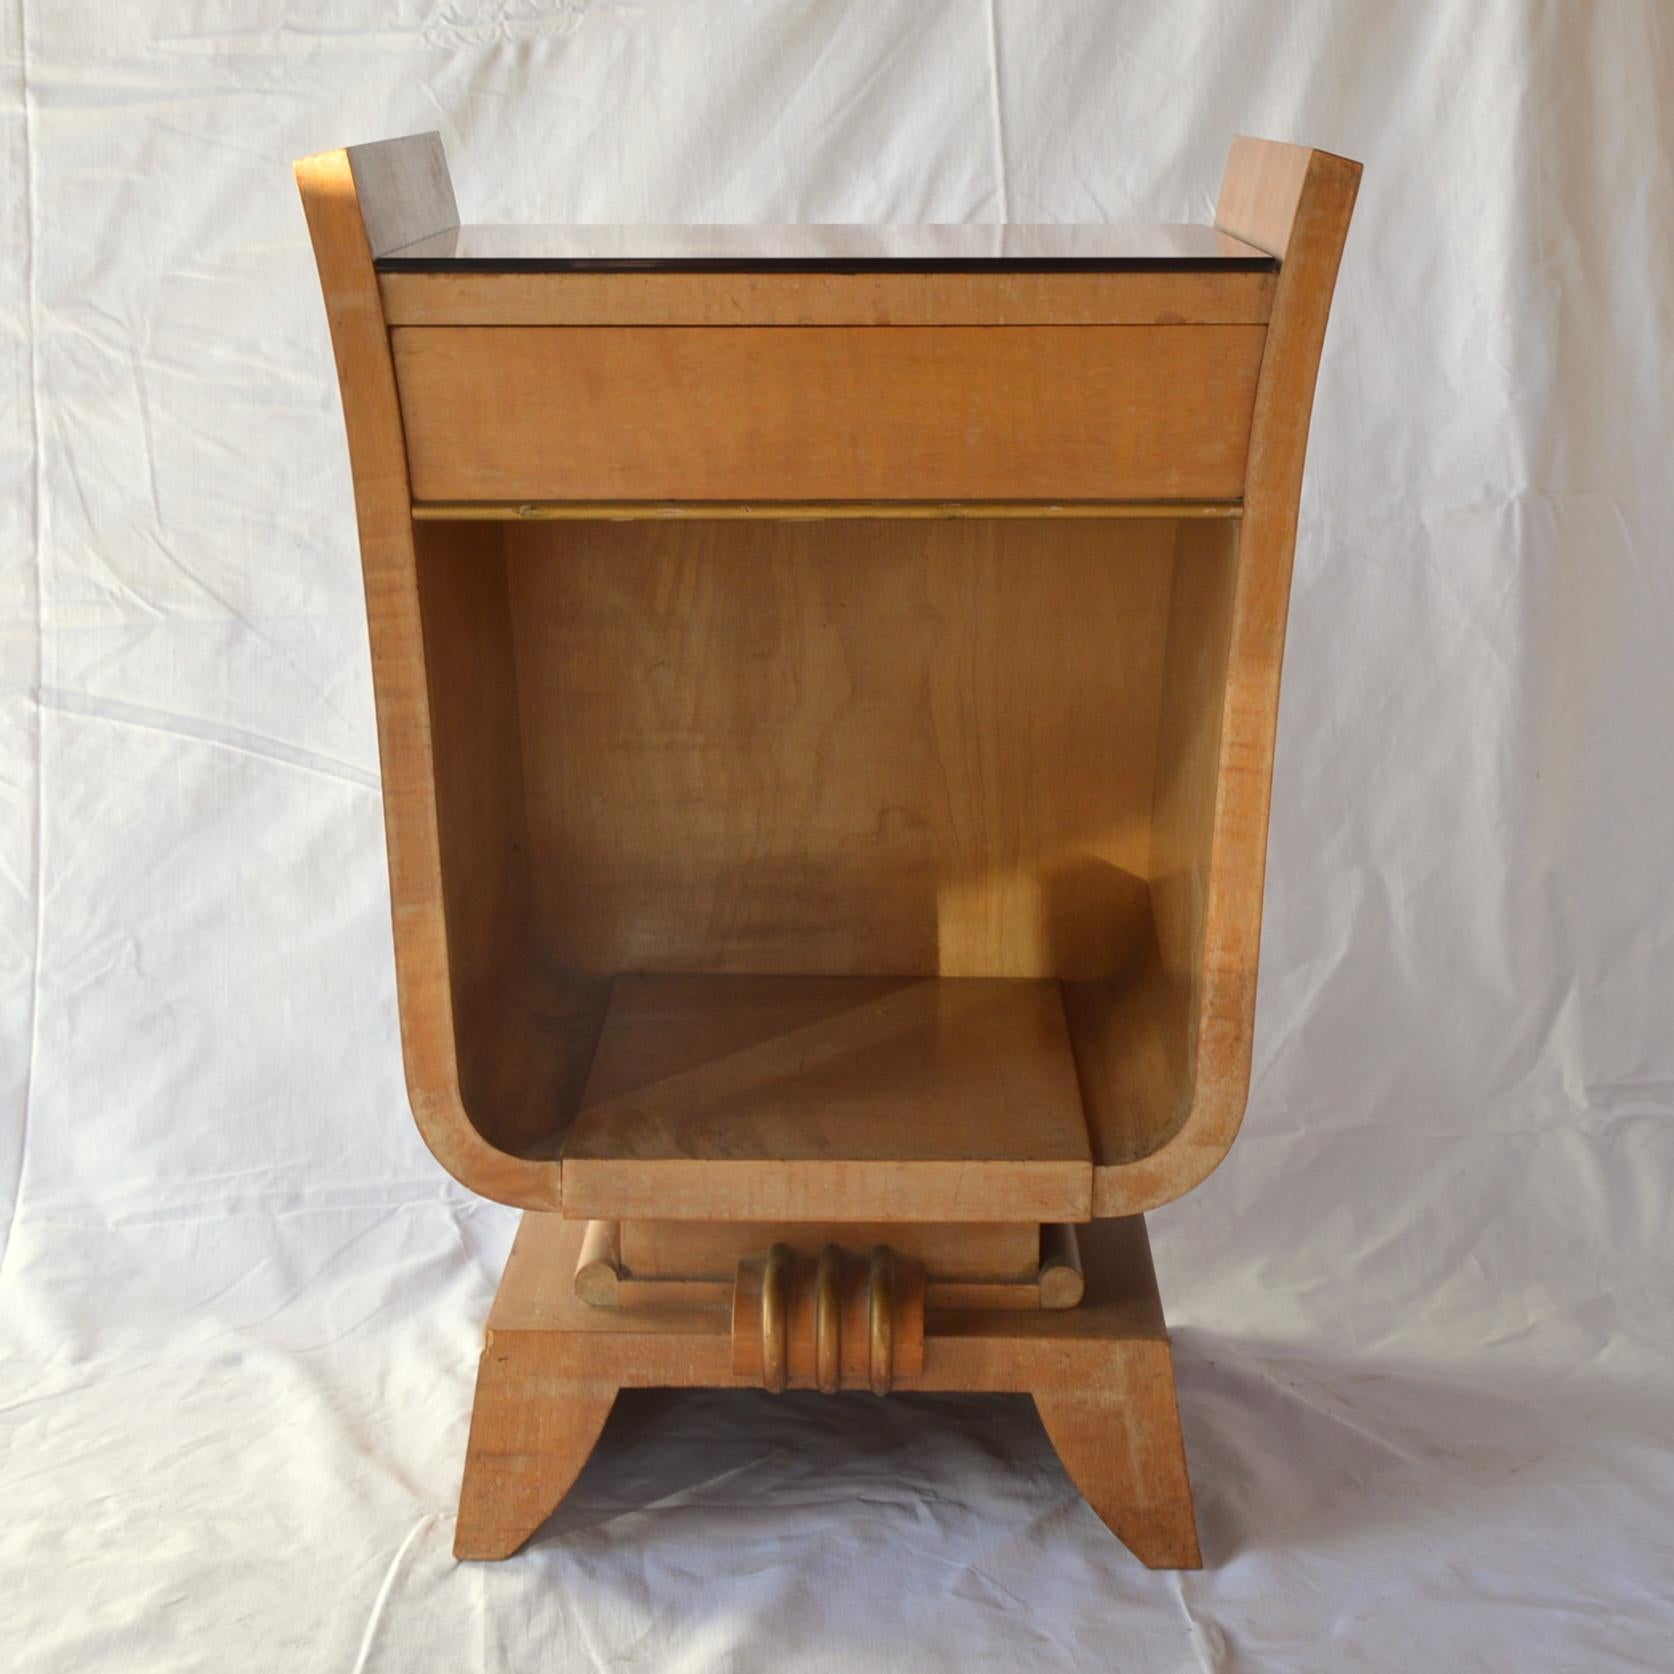 Belgian Pair of French Art Deco Bedside Tables from the 1930s